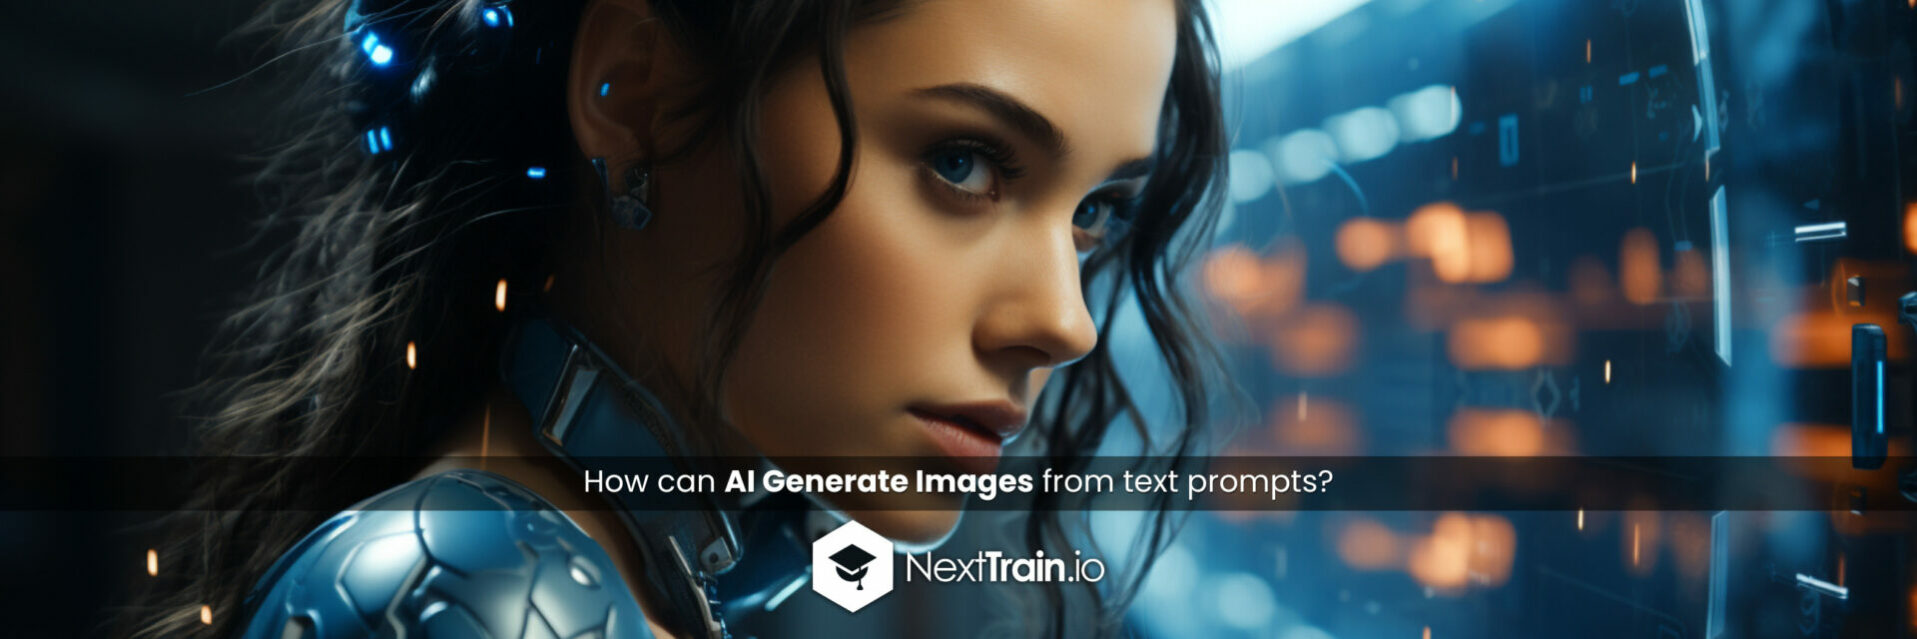 How can AI Generate Images from text prompts?